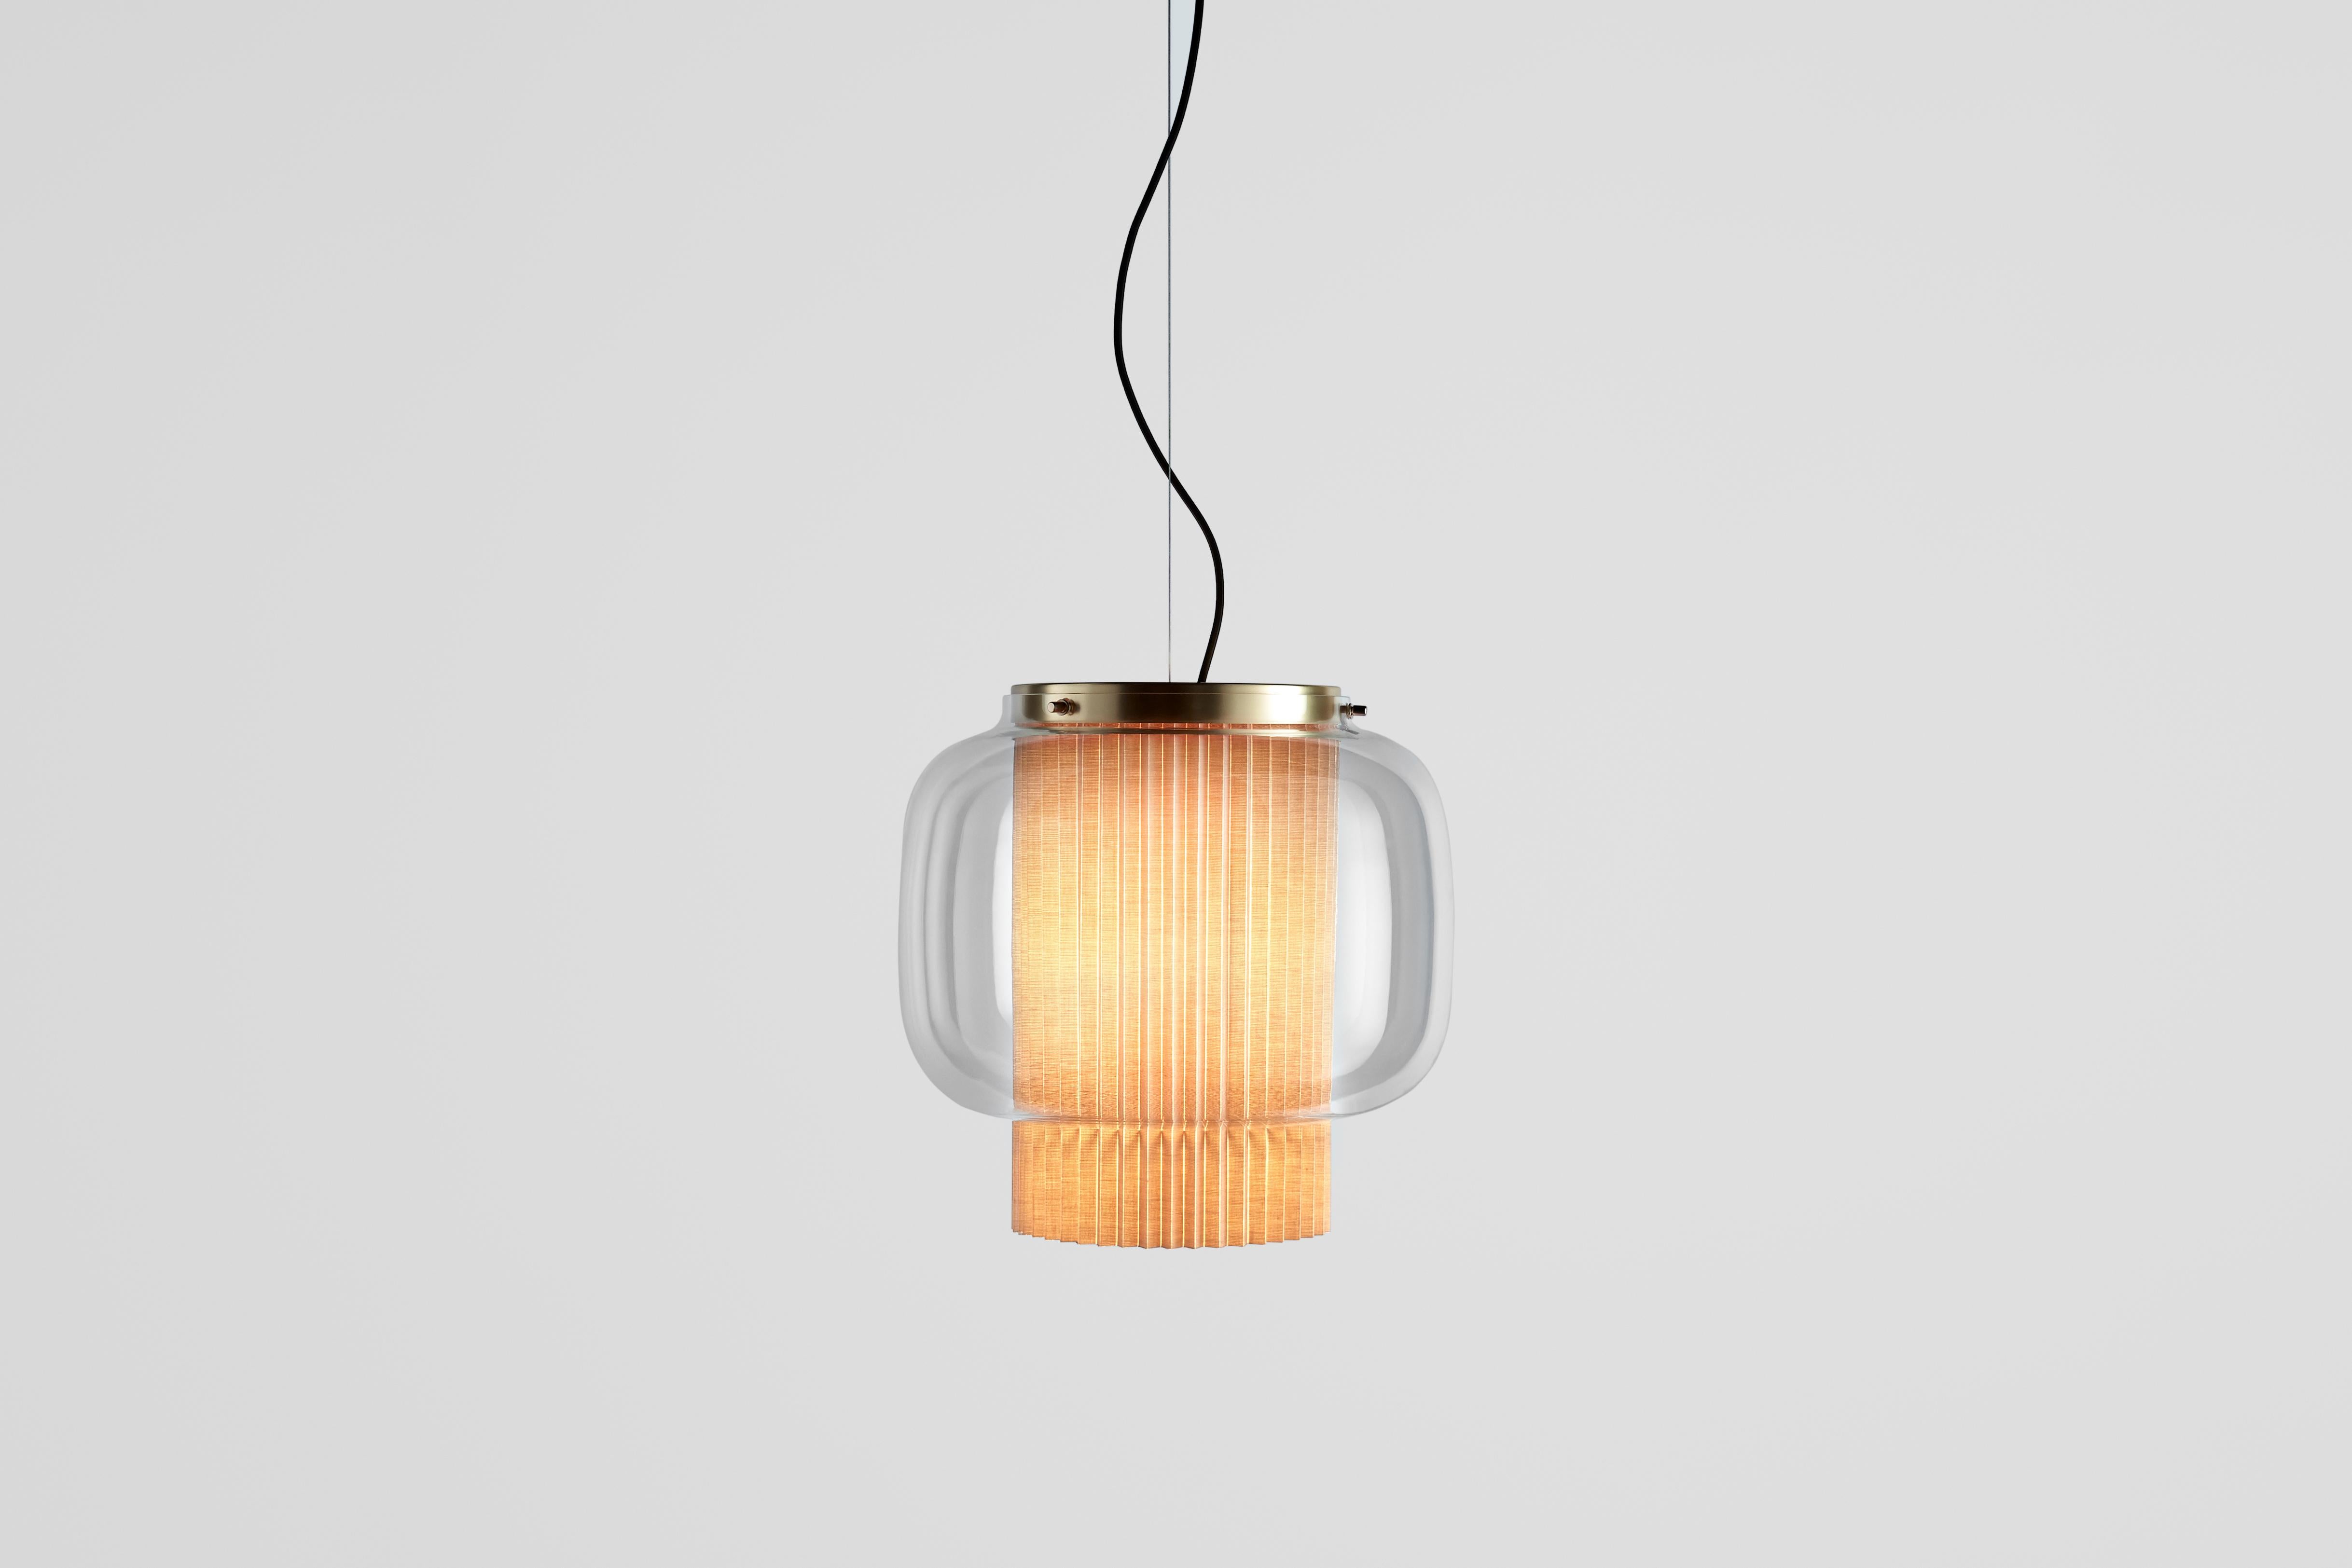 Manila T GR by Sebastian Herkner


An incredibly elegant combination of artisanal blown glass and a plissé textile diffuser. Its name comes from Spanish 